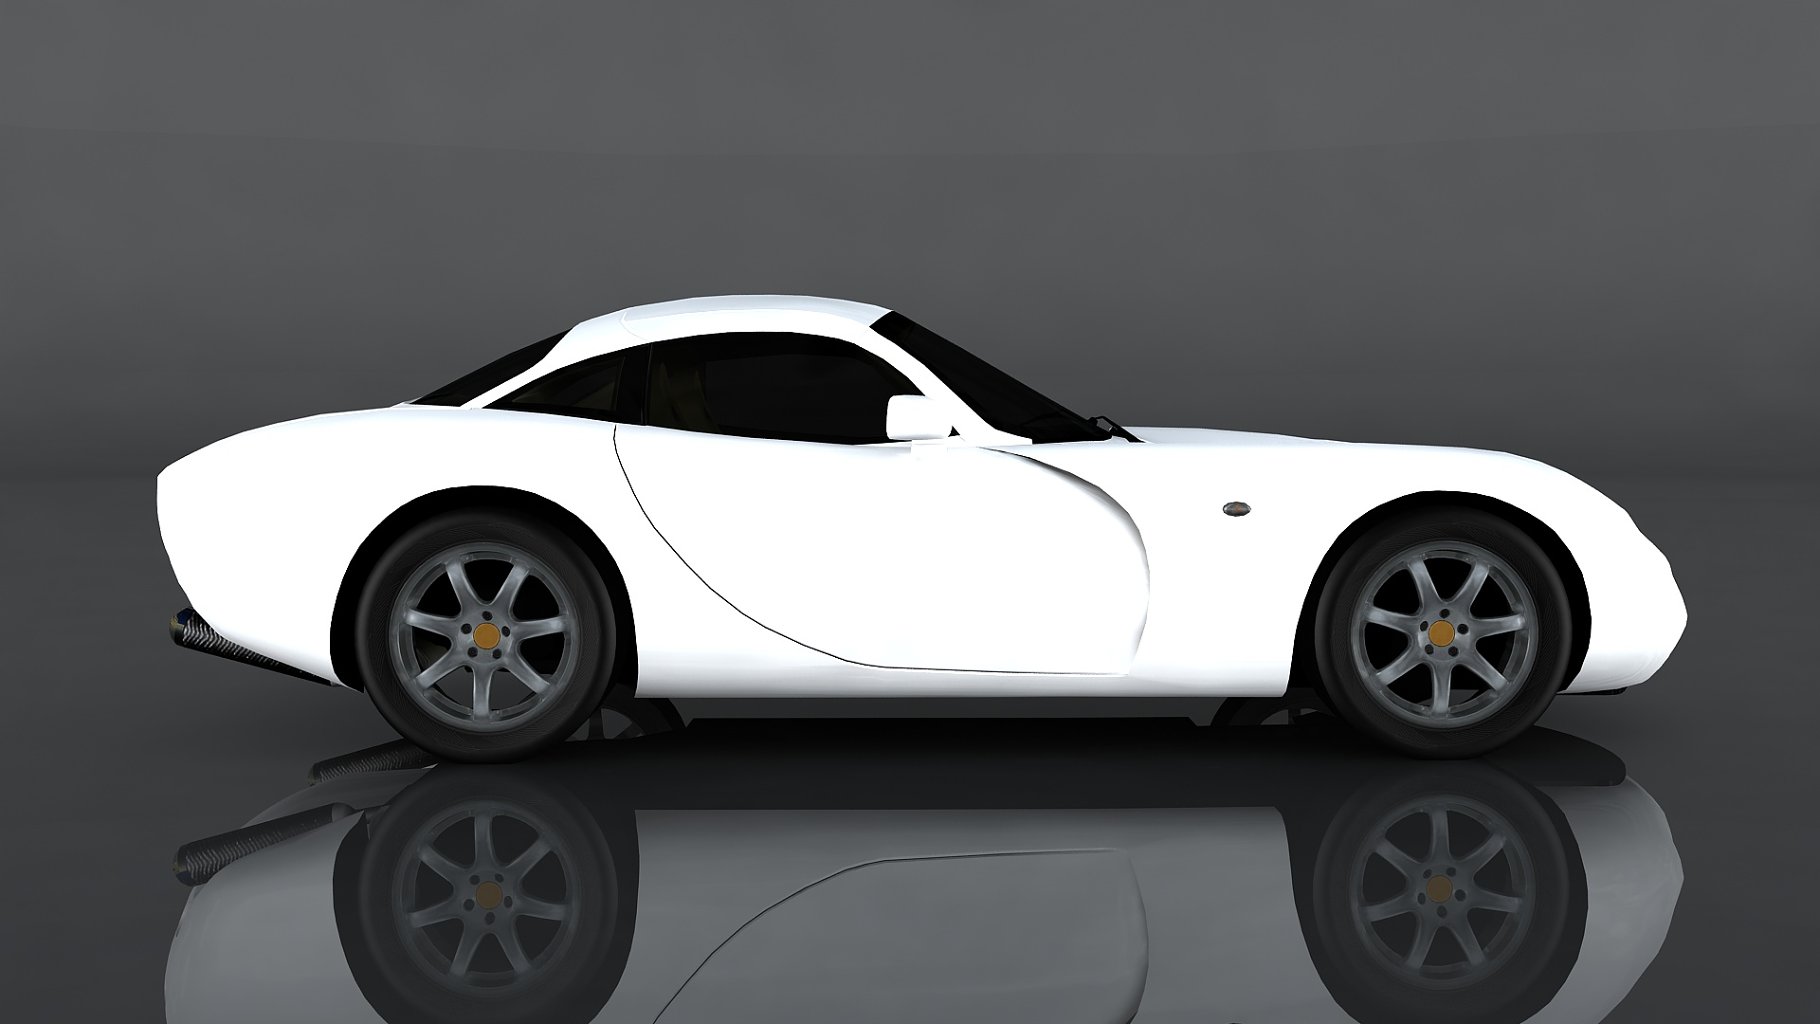 Mockup in the side of 2001 tvr tuscan s car.